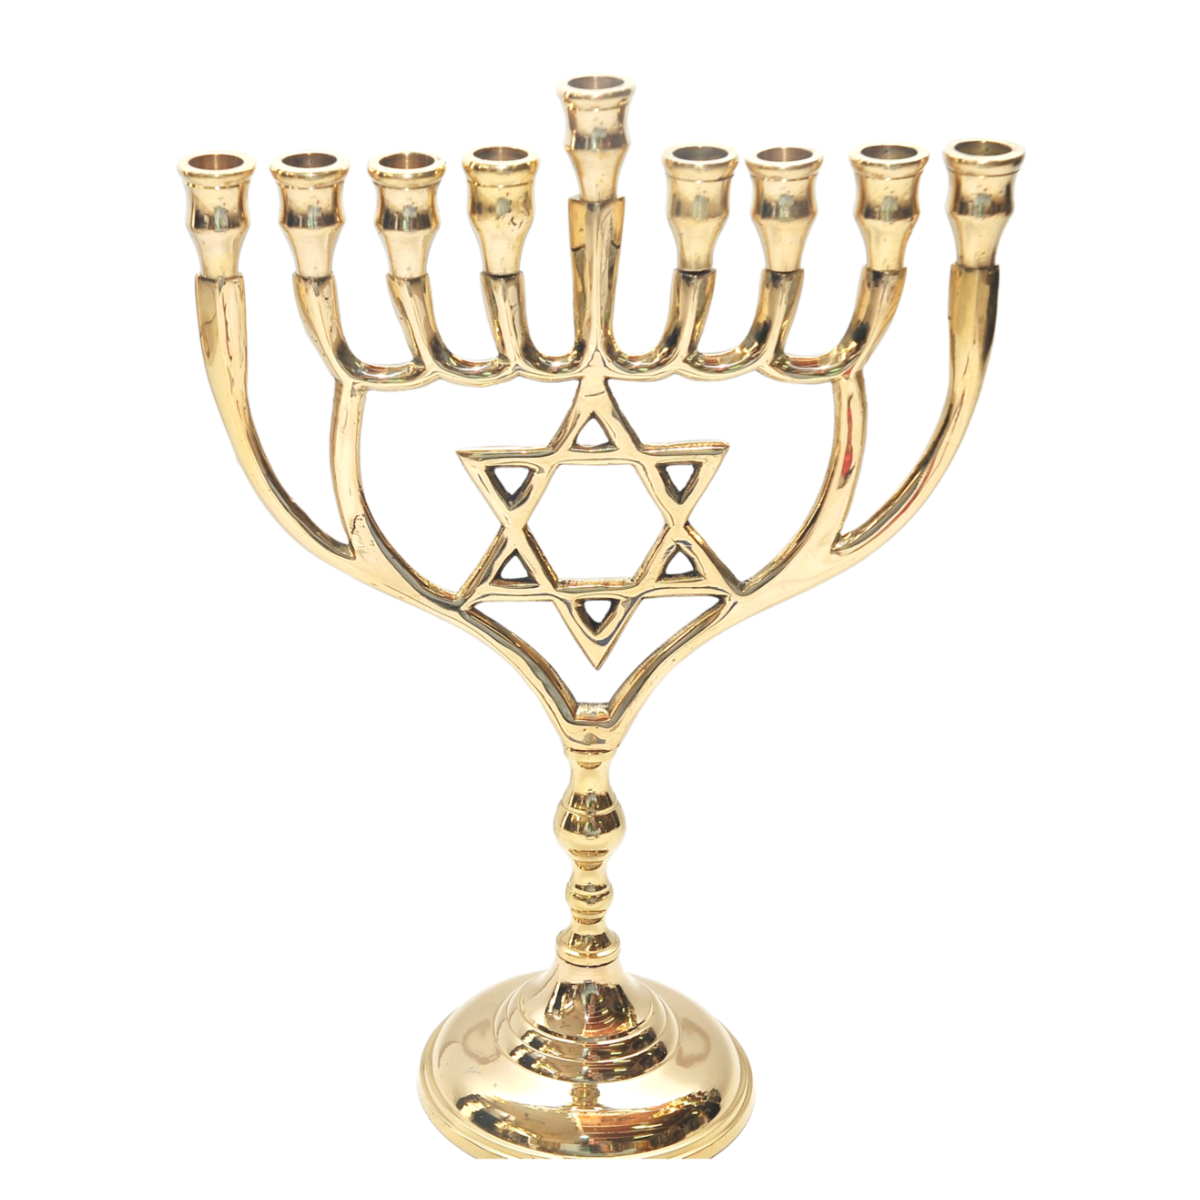 Hanukkah Menorah with 9 Branches and Star of David size 11.8 / 7.8 inch